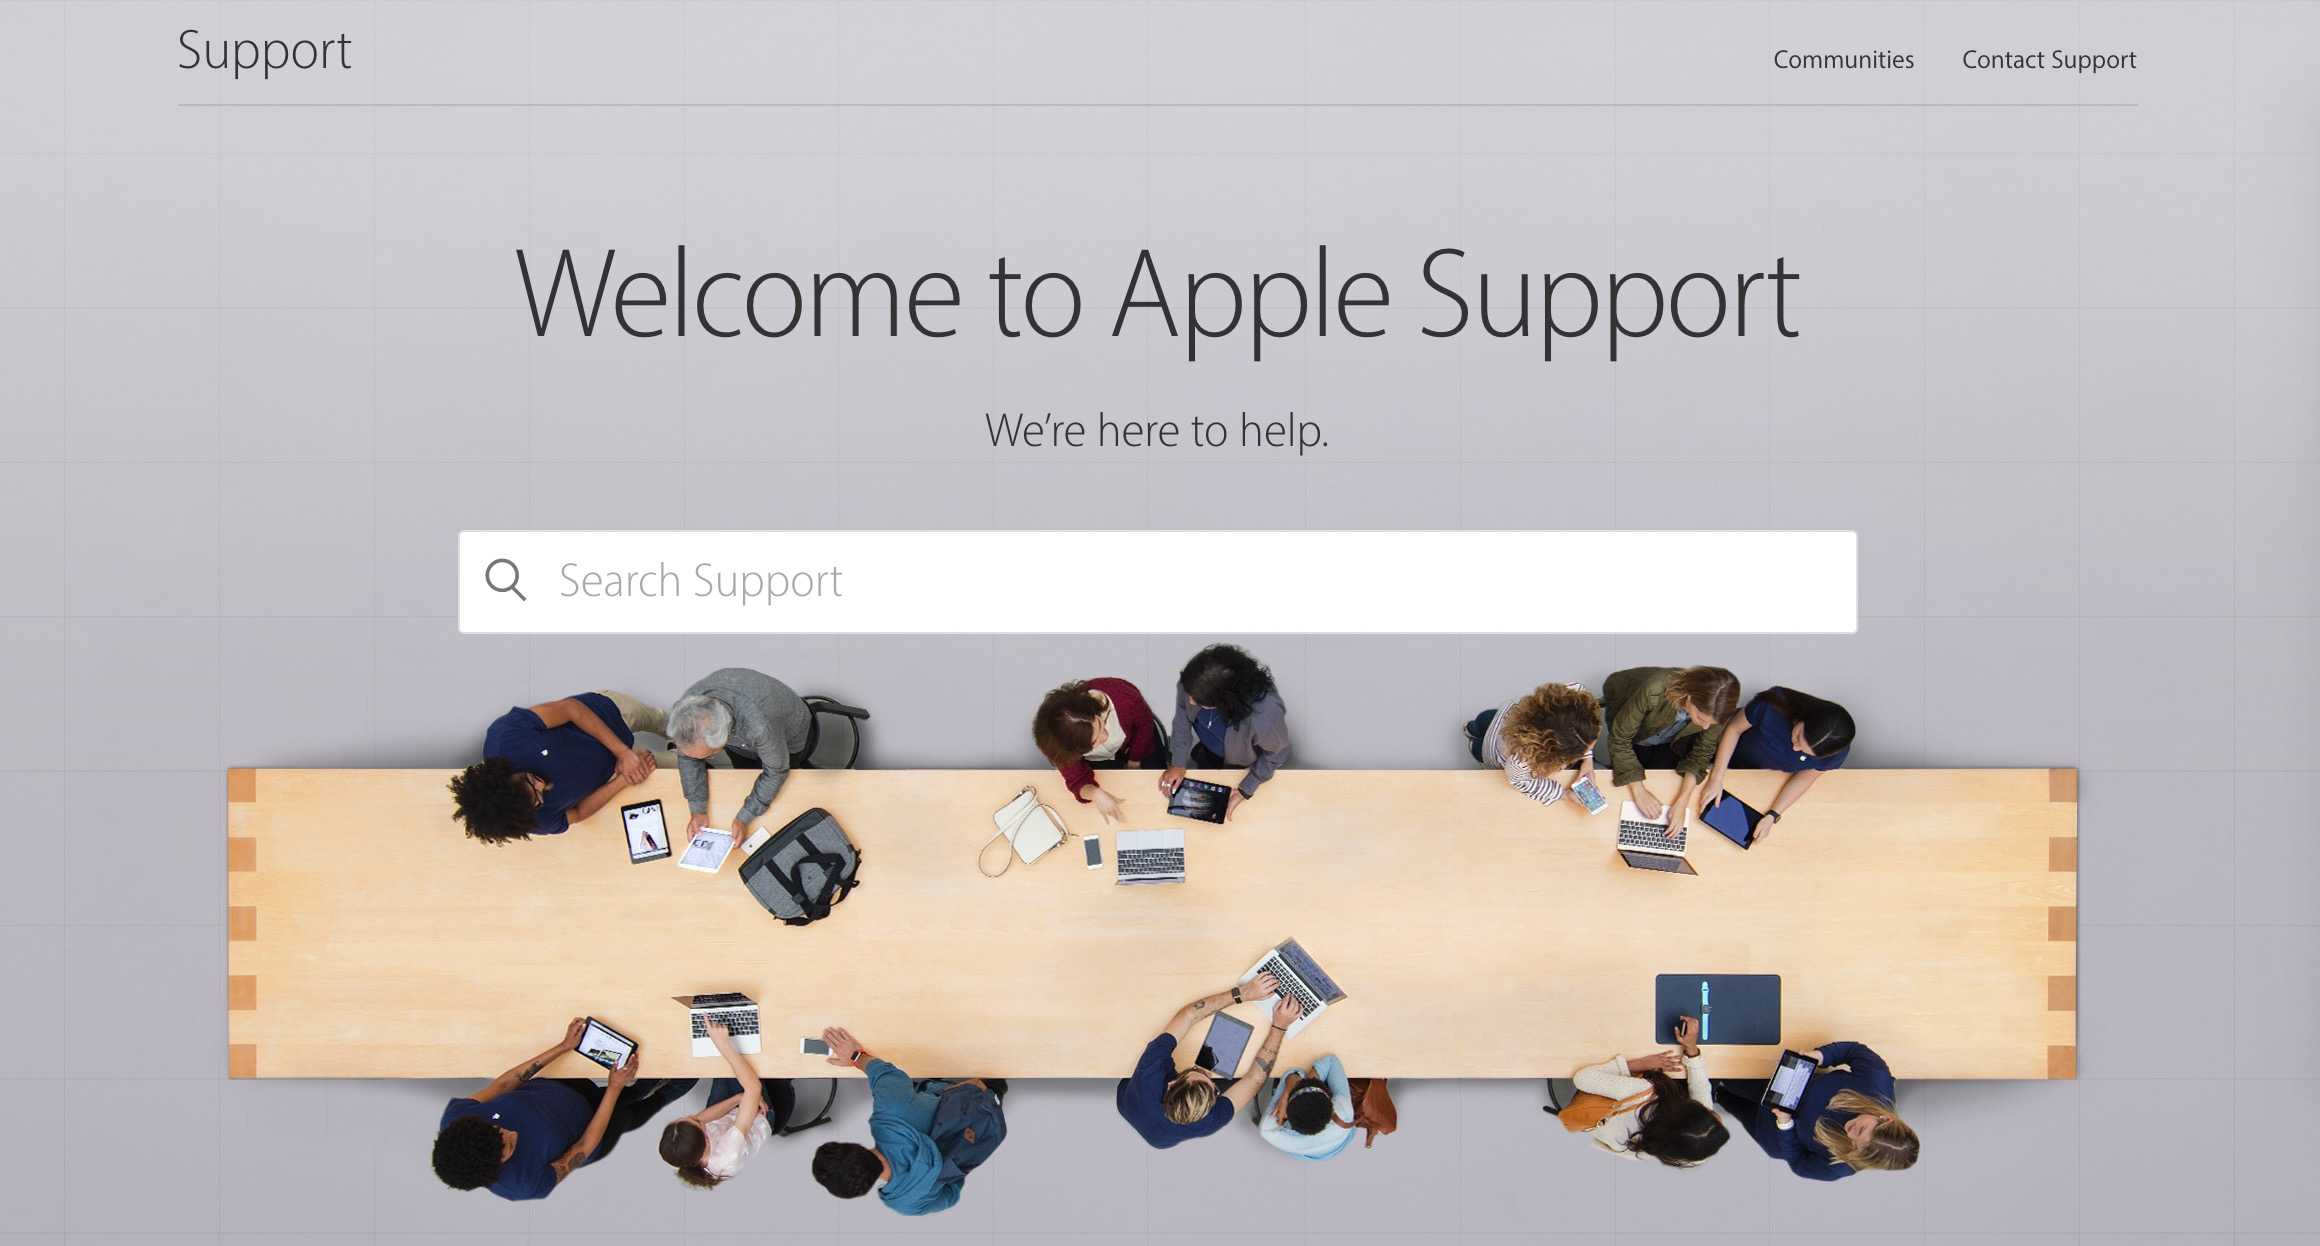 Get help faster and more easily with the new Apple Support site.